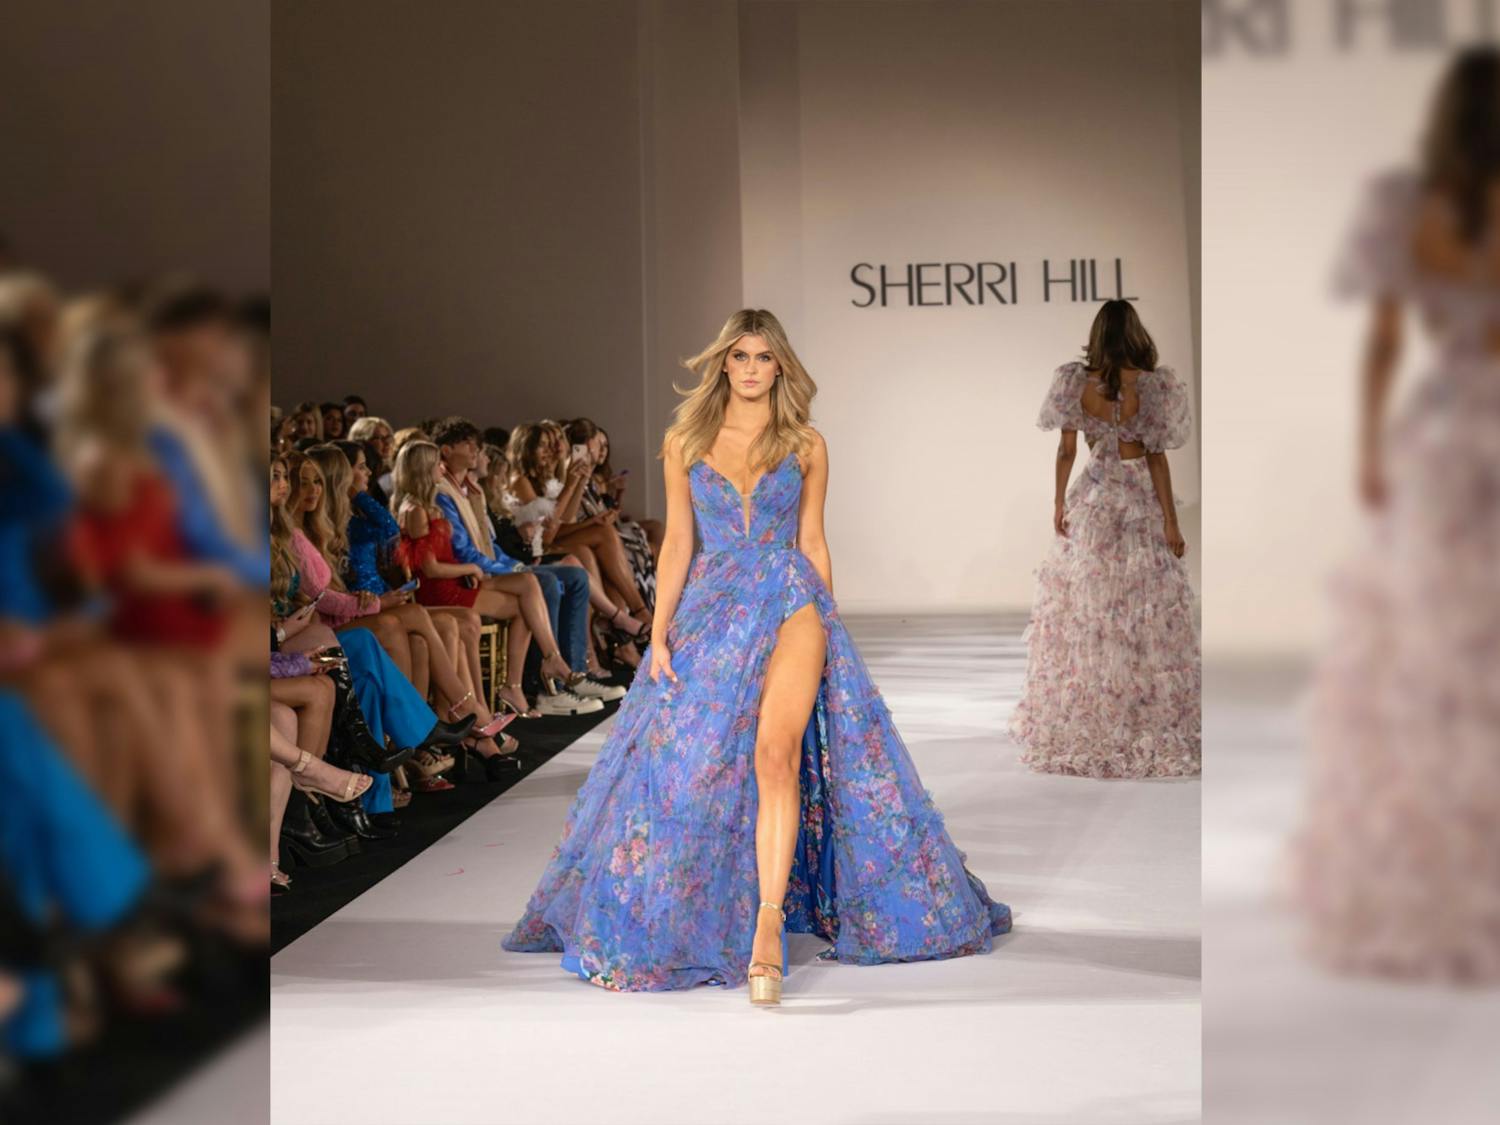 Second-year fashion merchandising and retailing student Augusta Roach strolls the runway wearing Sherri Hill at New York Fashion Week on Sept. 9, 2022. Roach says this experience was one of the greatest of her modeling career so far.&nbsp;